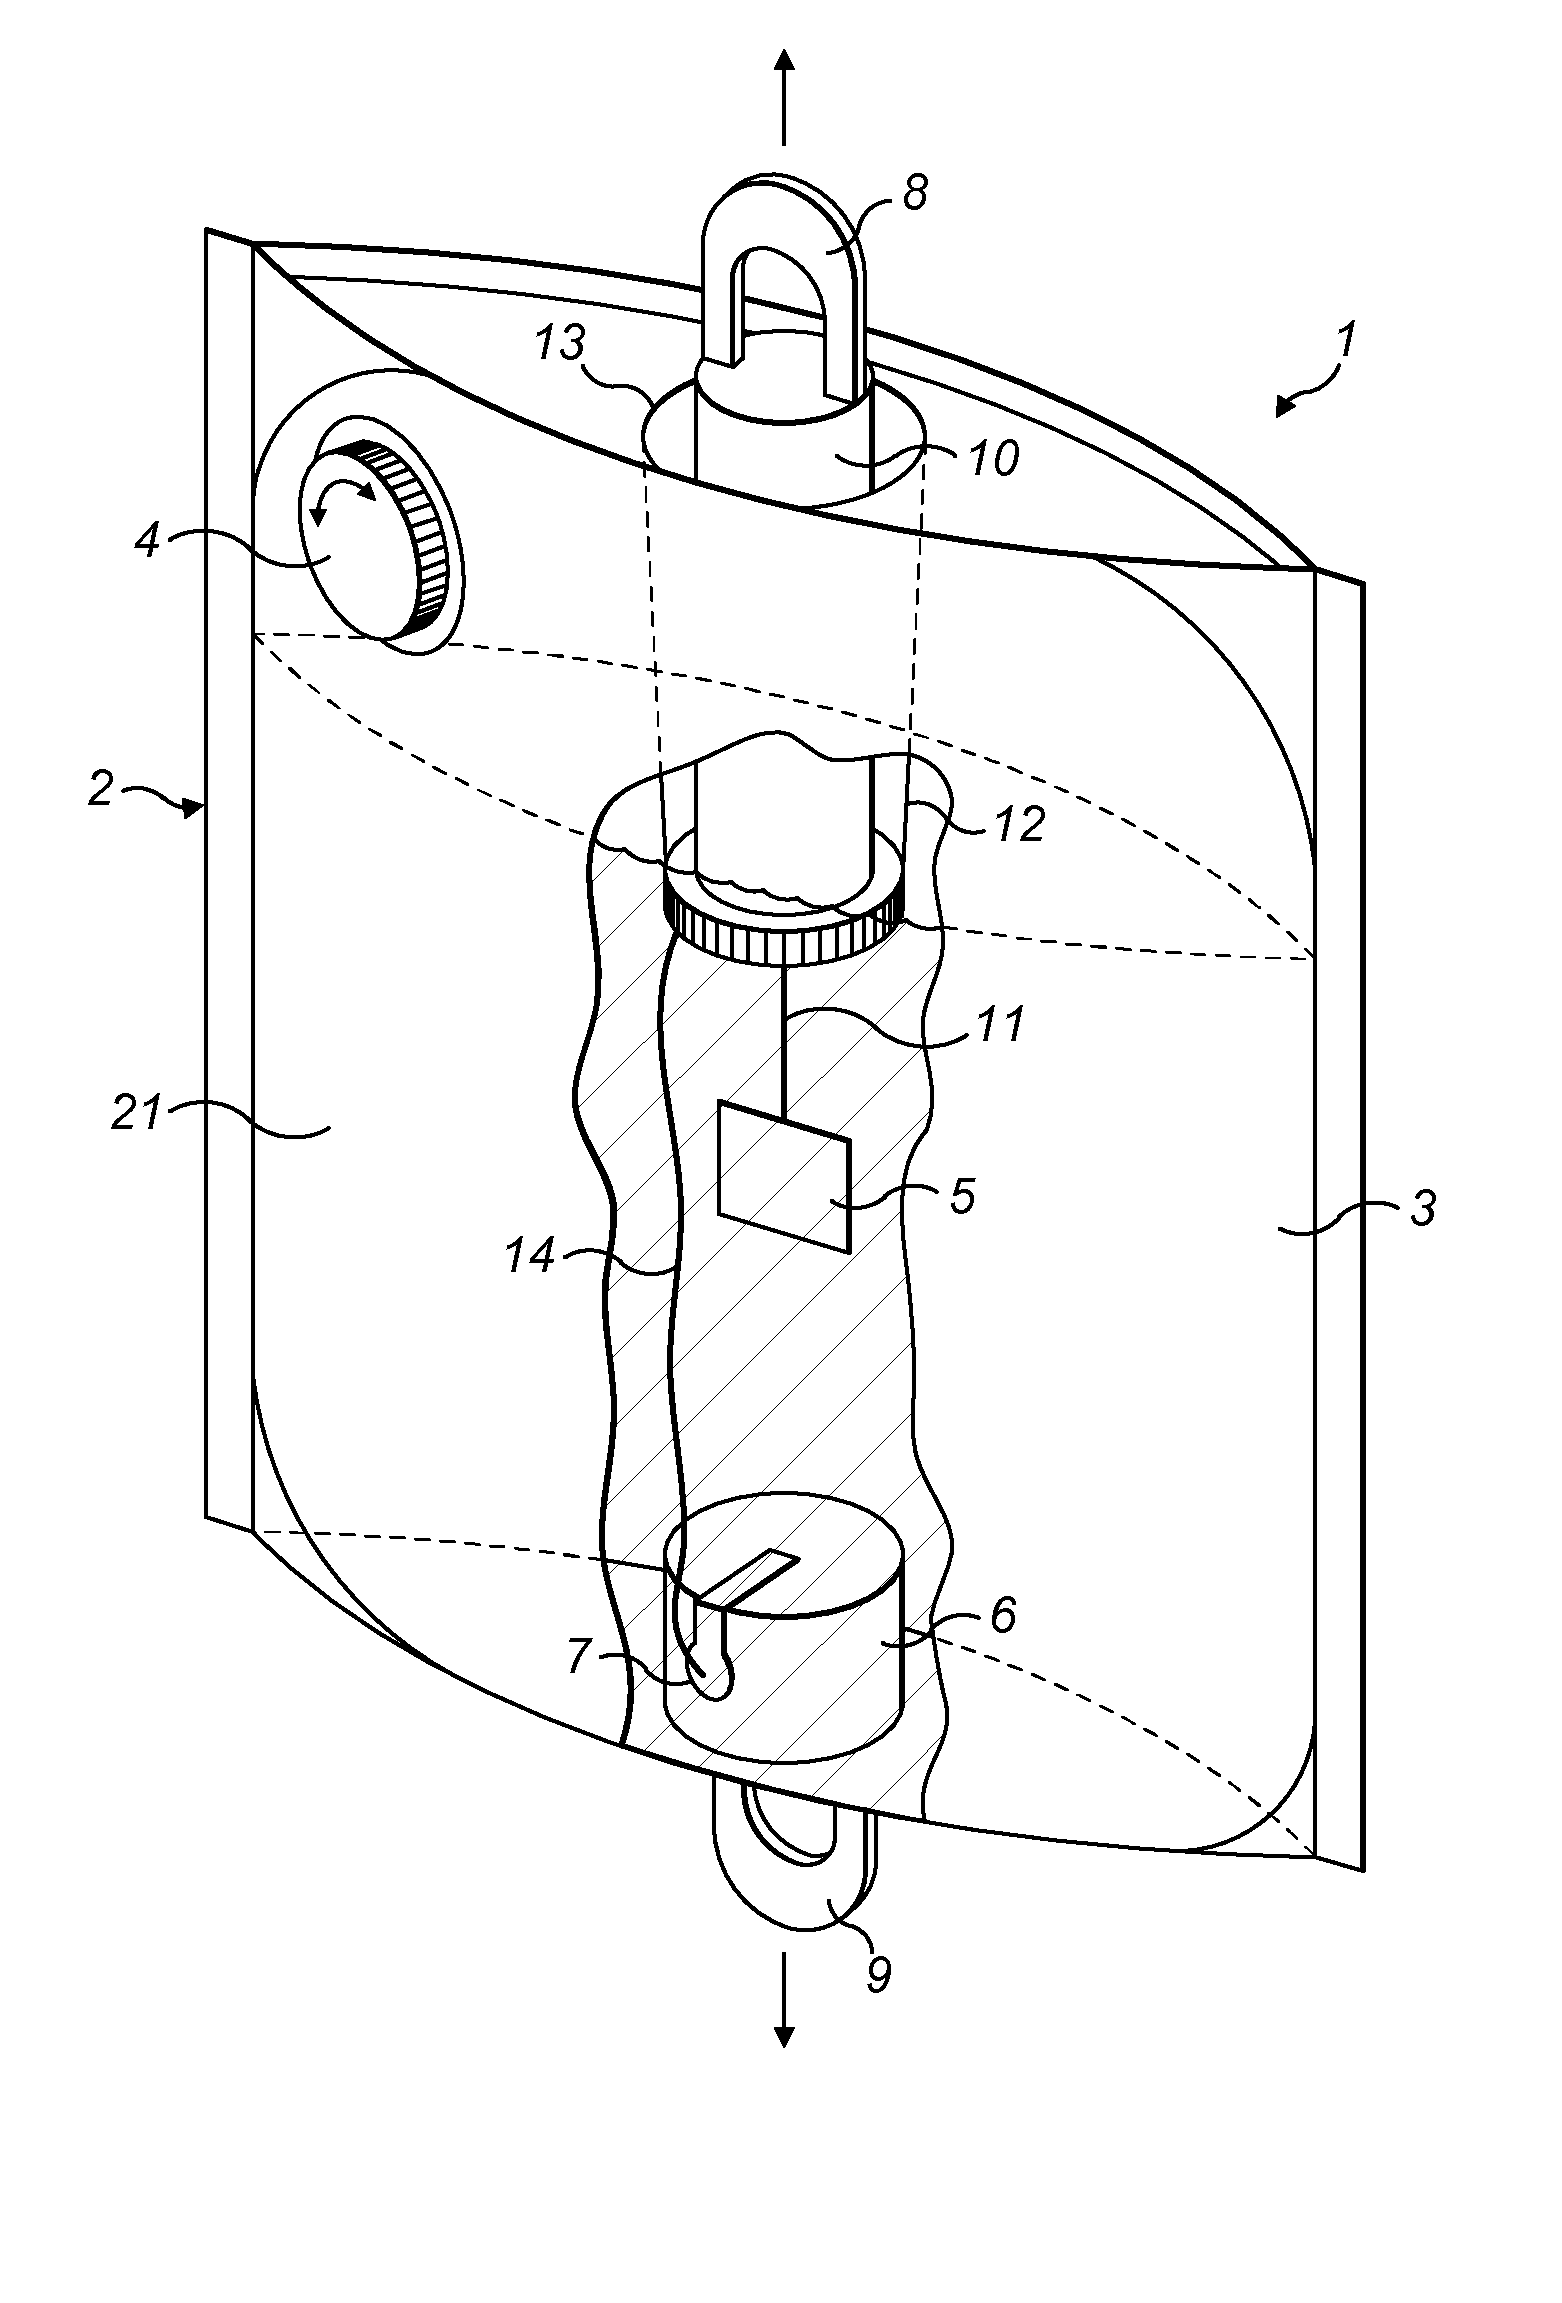 Device designed to receive a biological sample